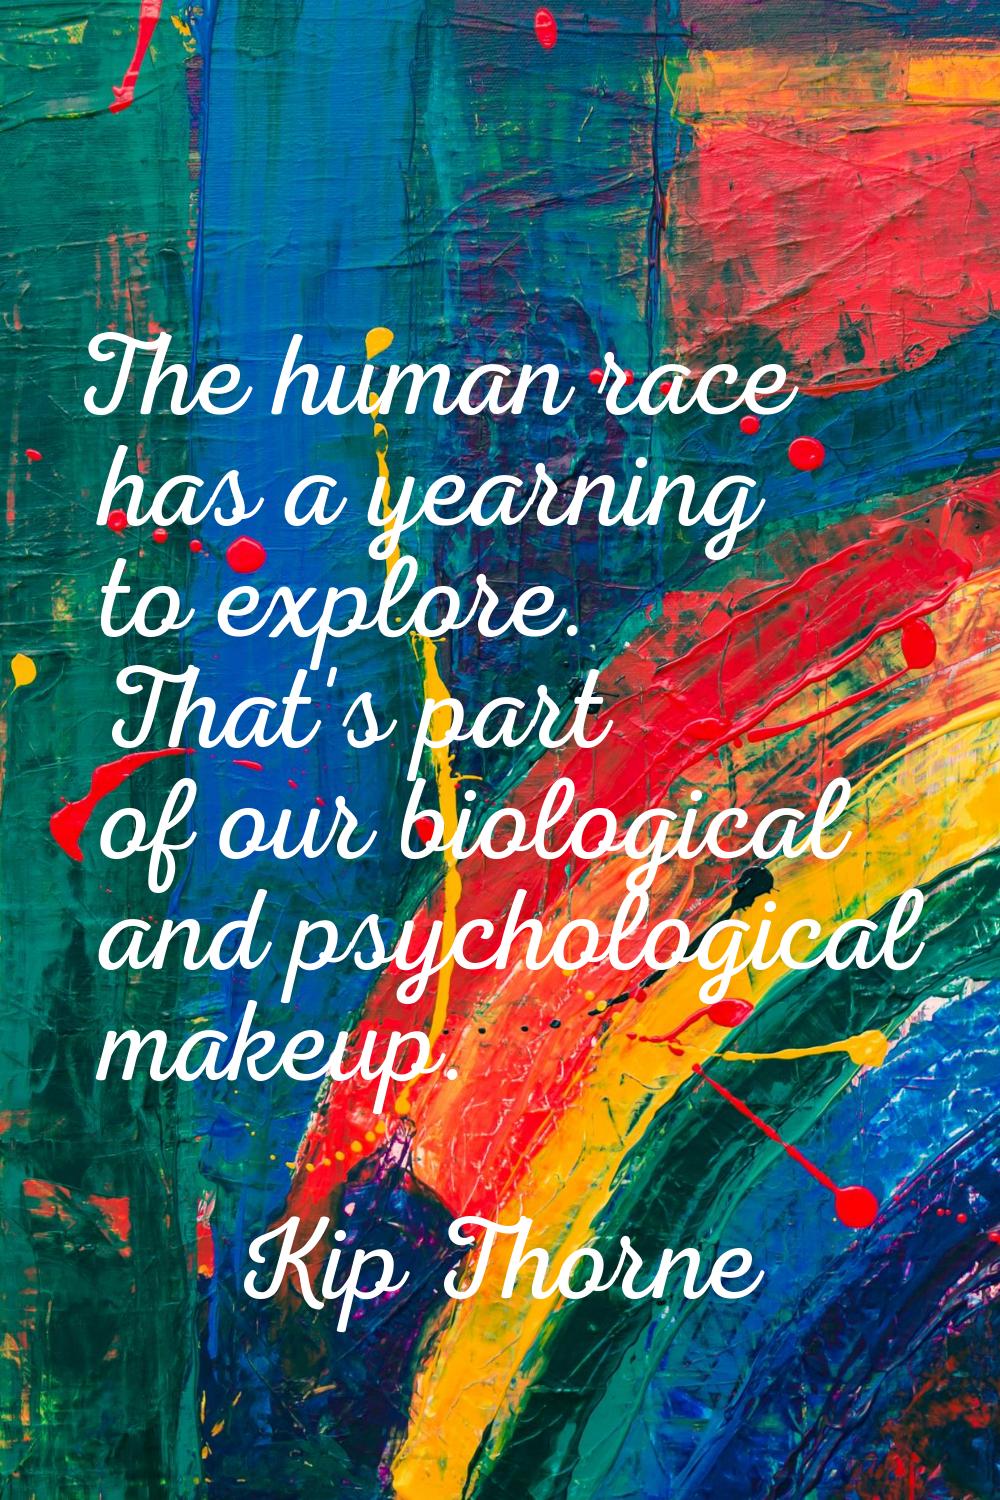 The human race has a yearning to explore. That's part of our biological and psychological makeup.